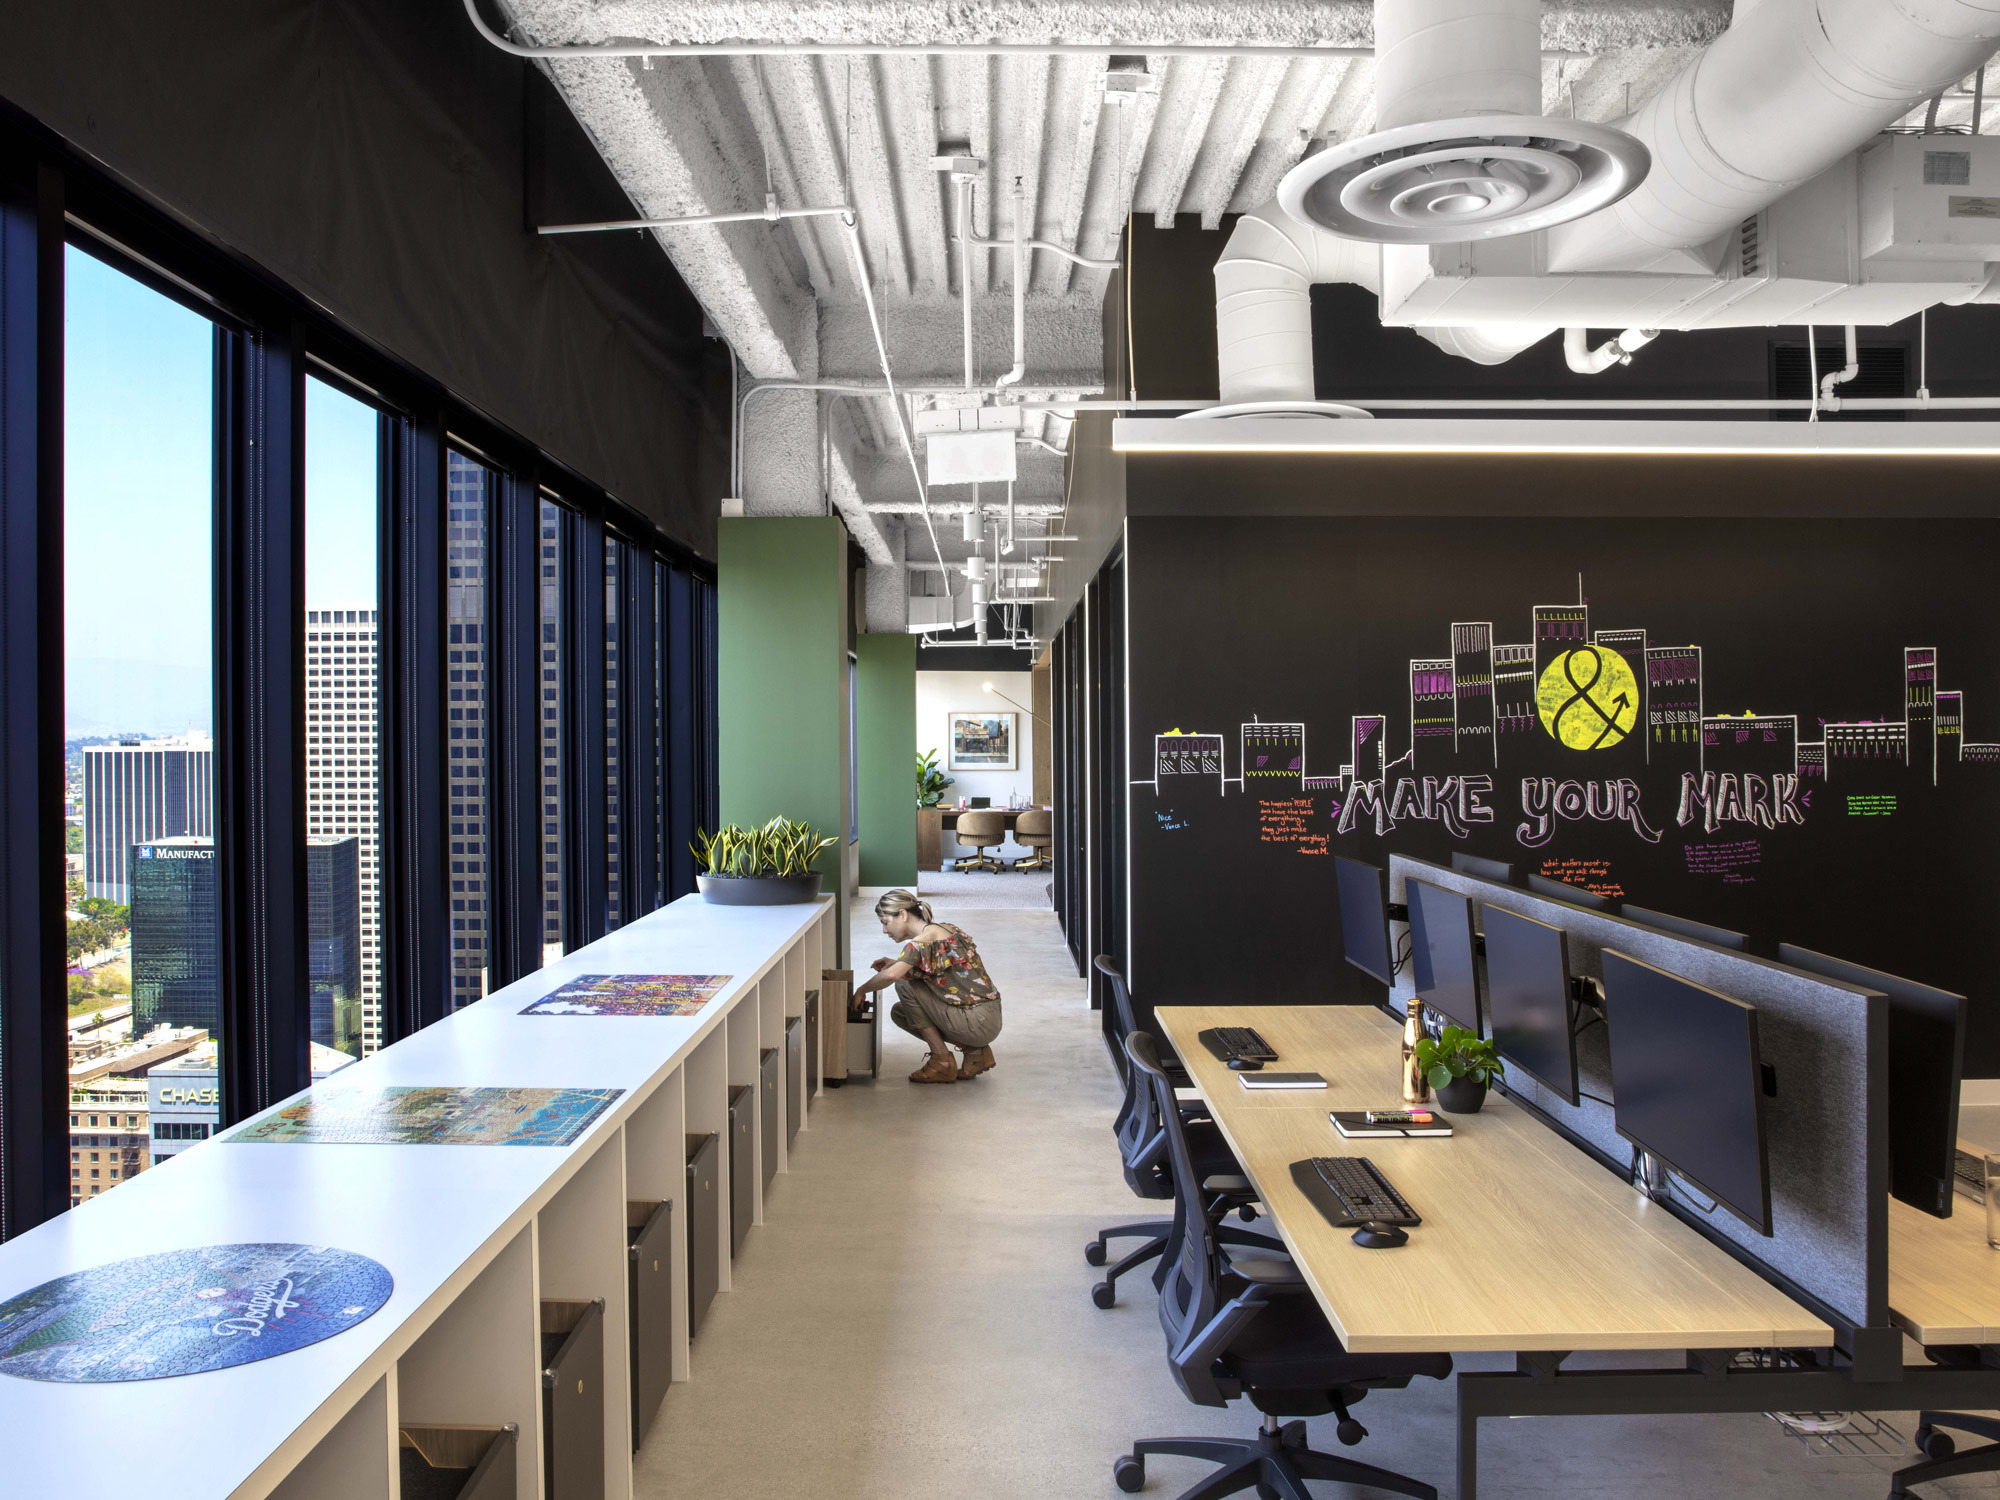 Modern office space with expansive city view, featuring exposed ceiling ductwork, floor-to-ceiling windows, and a vibrant, graffiti-style mural with the text "Make Your Mark." Individual workstations are complemented by colorful area rugs and open collaborative areas.